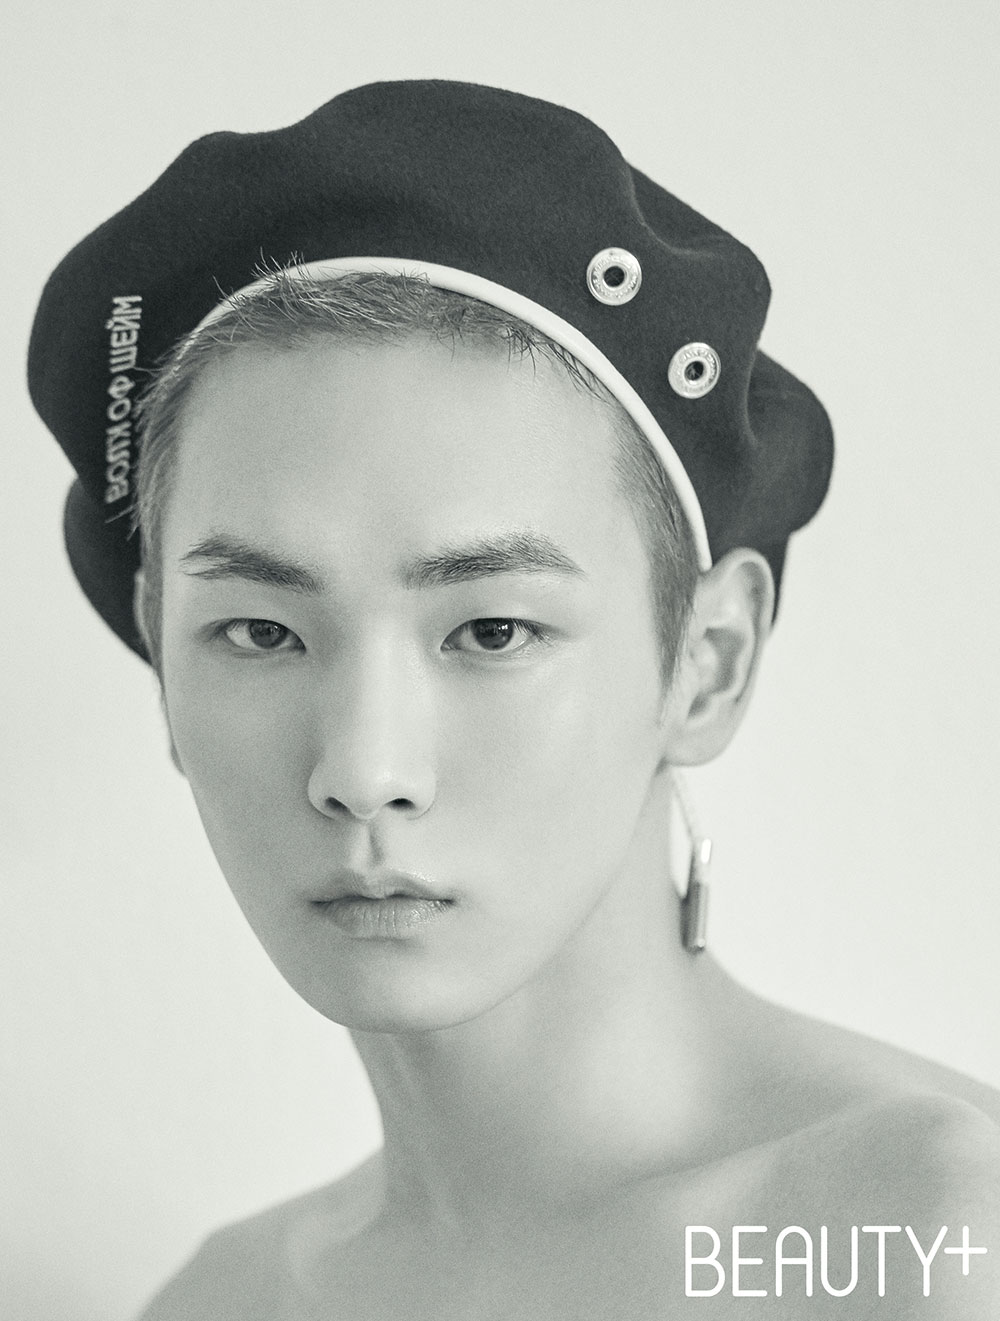 Beauty Magazine BeautyClean has released a picture of SHINee Key, a unique charm. This picture featured the cover of the September issue of BeautyClean.SHINee key, who recently filmed the movie Run and Run with actor Gong Hyo Jin and Jo Jung-suk.SHINee Key, which transformed into a short hairstyle for the movie character, completed a brilliant visual picture with a professional pose as a pictorial craftsman.SHINee Key is currently performing as an MC on TVn entertainment Amazing Saturday and is showing off a sense of entertainment.He will also be the host of the only homecoming talk show Cheongdam Keichin in September, and will attract viewers with the charm of Yose-nam (a sexy man who cooks well).SHINee Keys pictorials, which digest any concept with their own unique charm, can be found in the September issue of Beauty Magazine BeautyPeace and SNS.Photo: Beauty